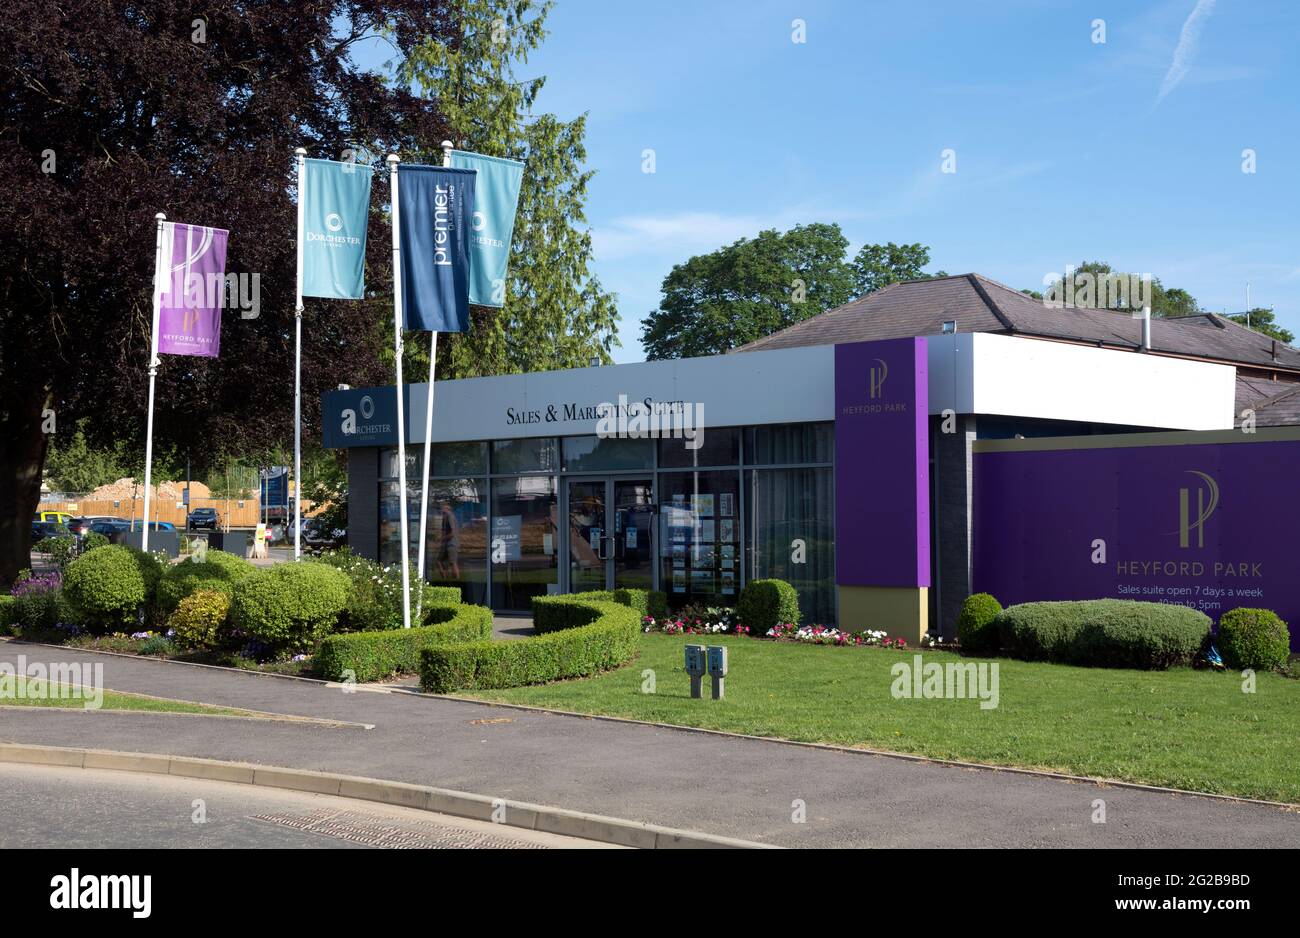 Sales and Marketing Suite, Heyford Park, Upper Heyford, Oxfordshire, Angleterre, ROYAUME-UNI Banque D'Images